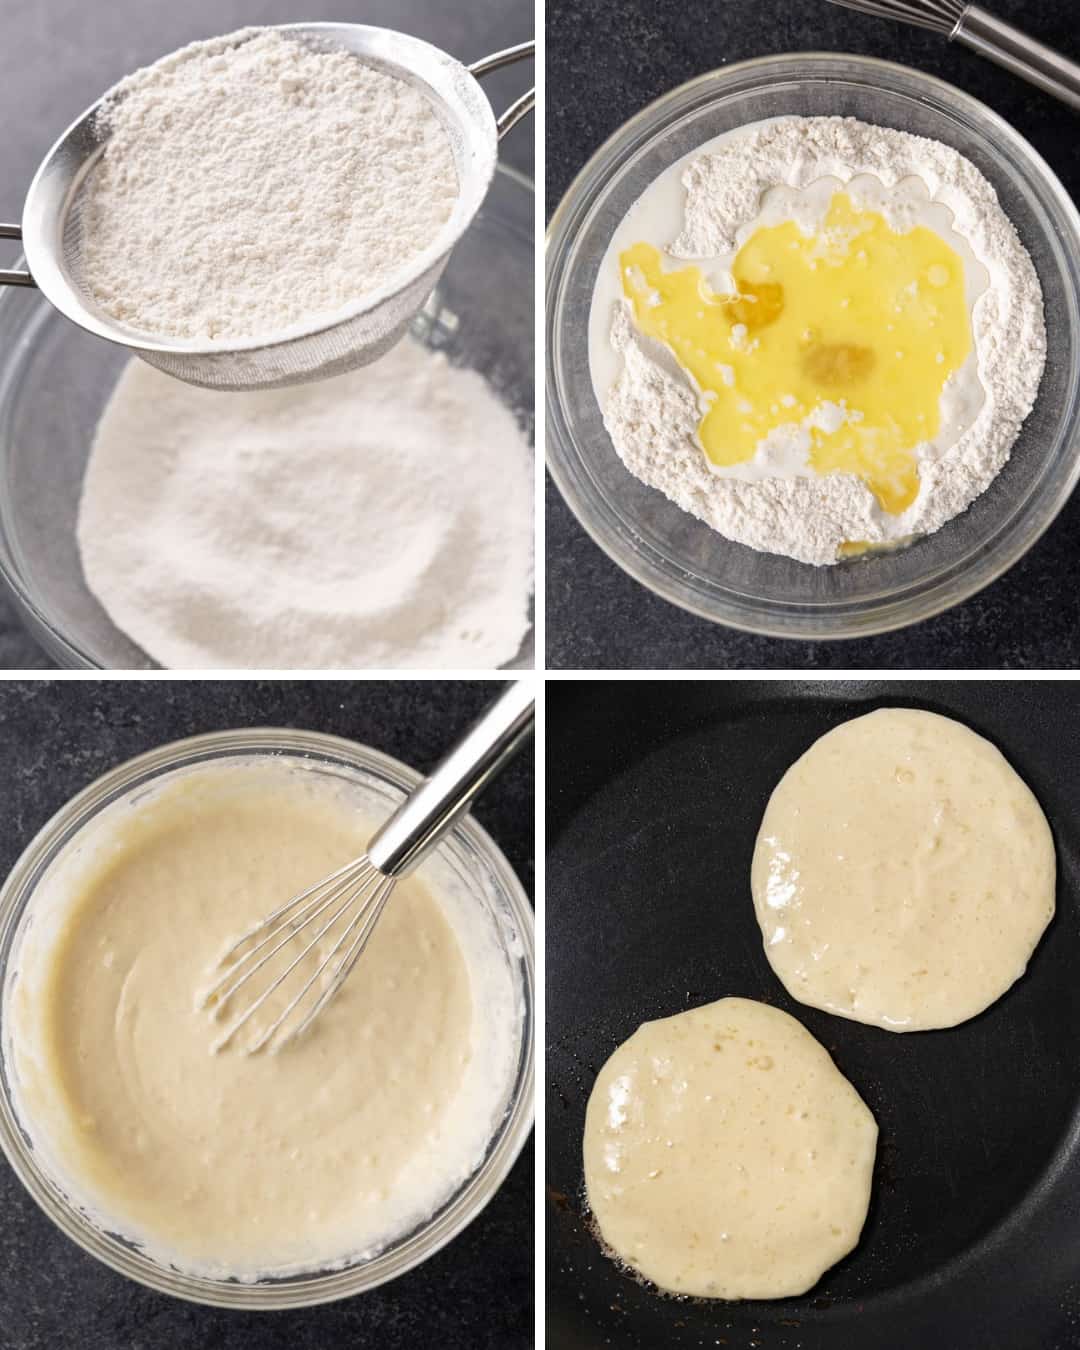 Process shots to show how to make pancakes from start to finish.